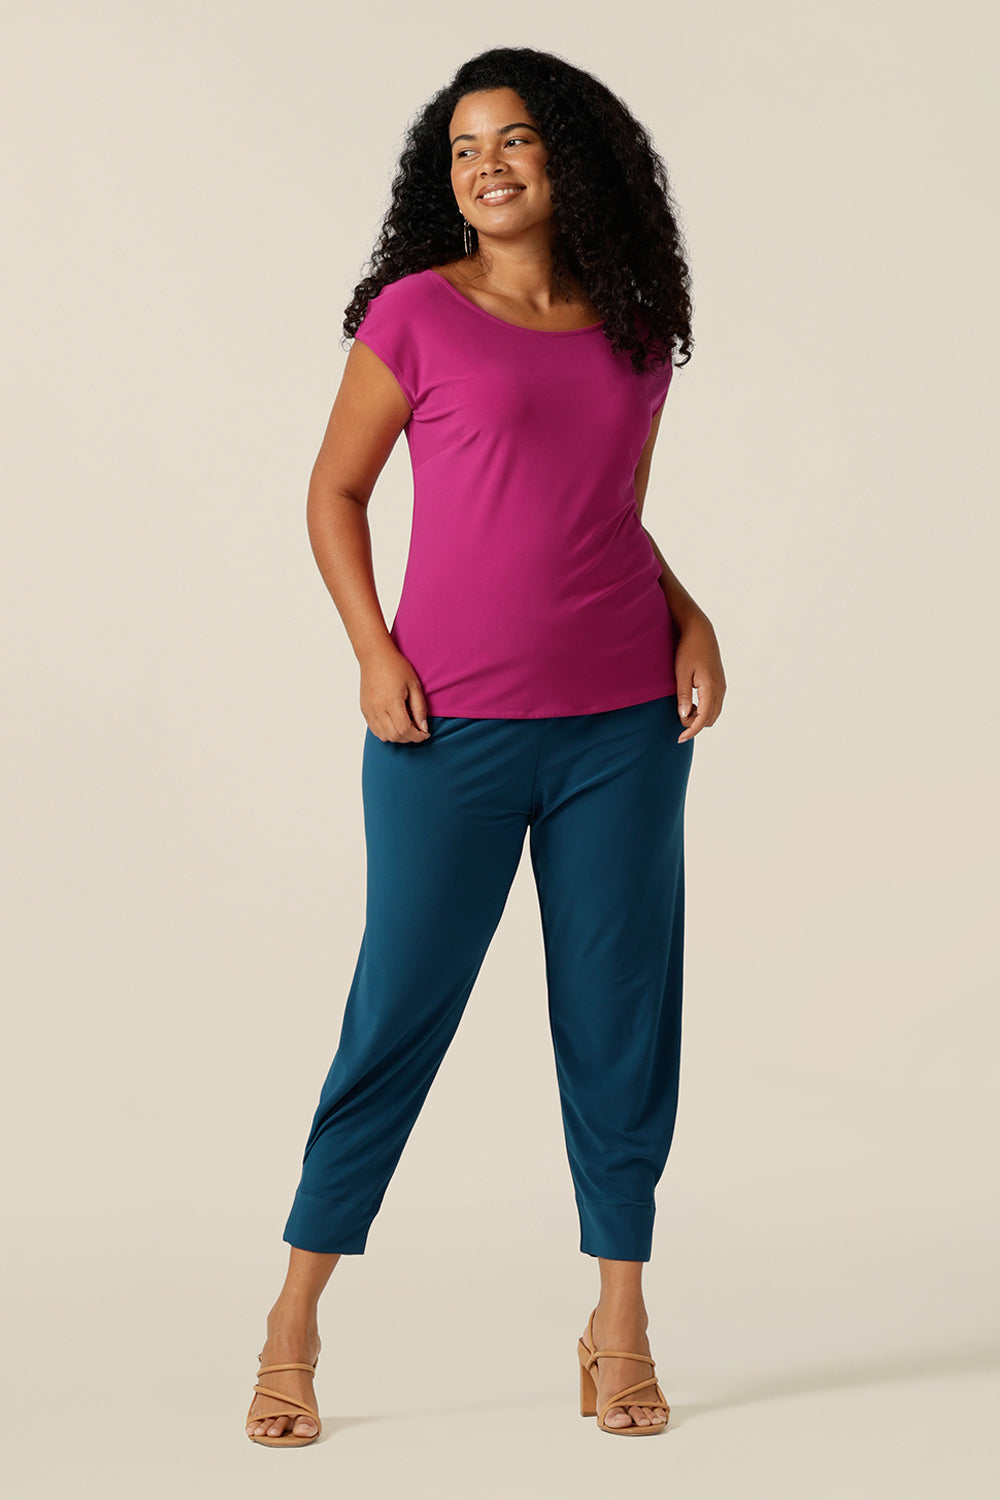 A size 12 woman wears a slim fit top with boat neckline and cap sleeves. In fuchsia pink stretch jersey, this top offer a comfortable slim fit for curvy women. The top is styled with a tapered leg jersey pant for a casual outfit.